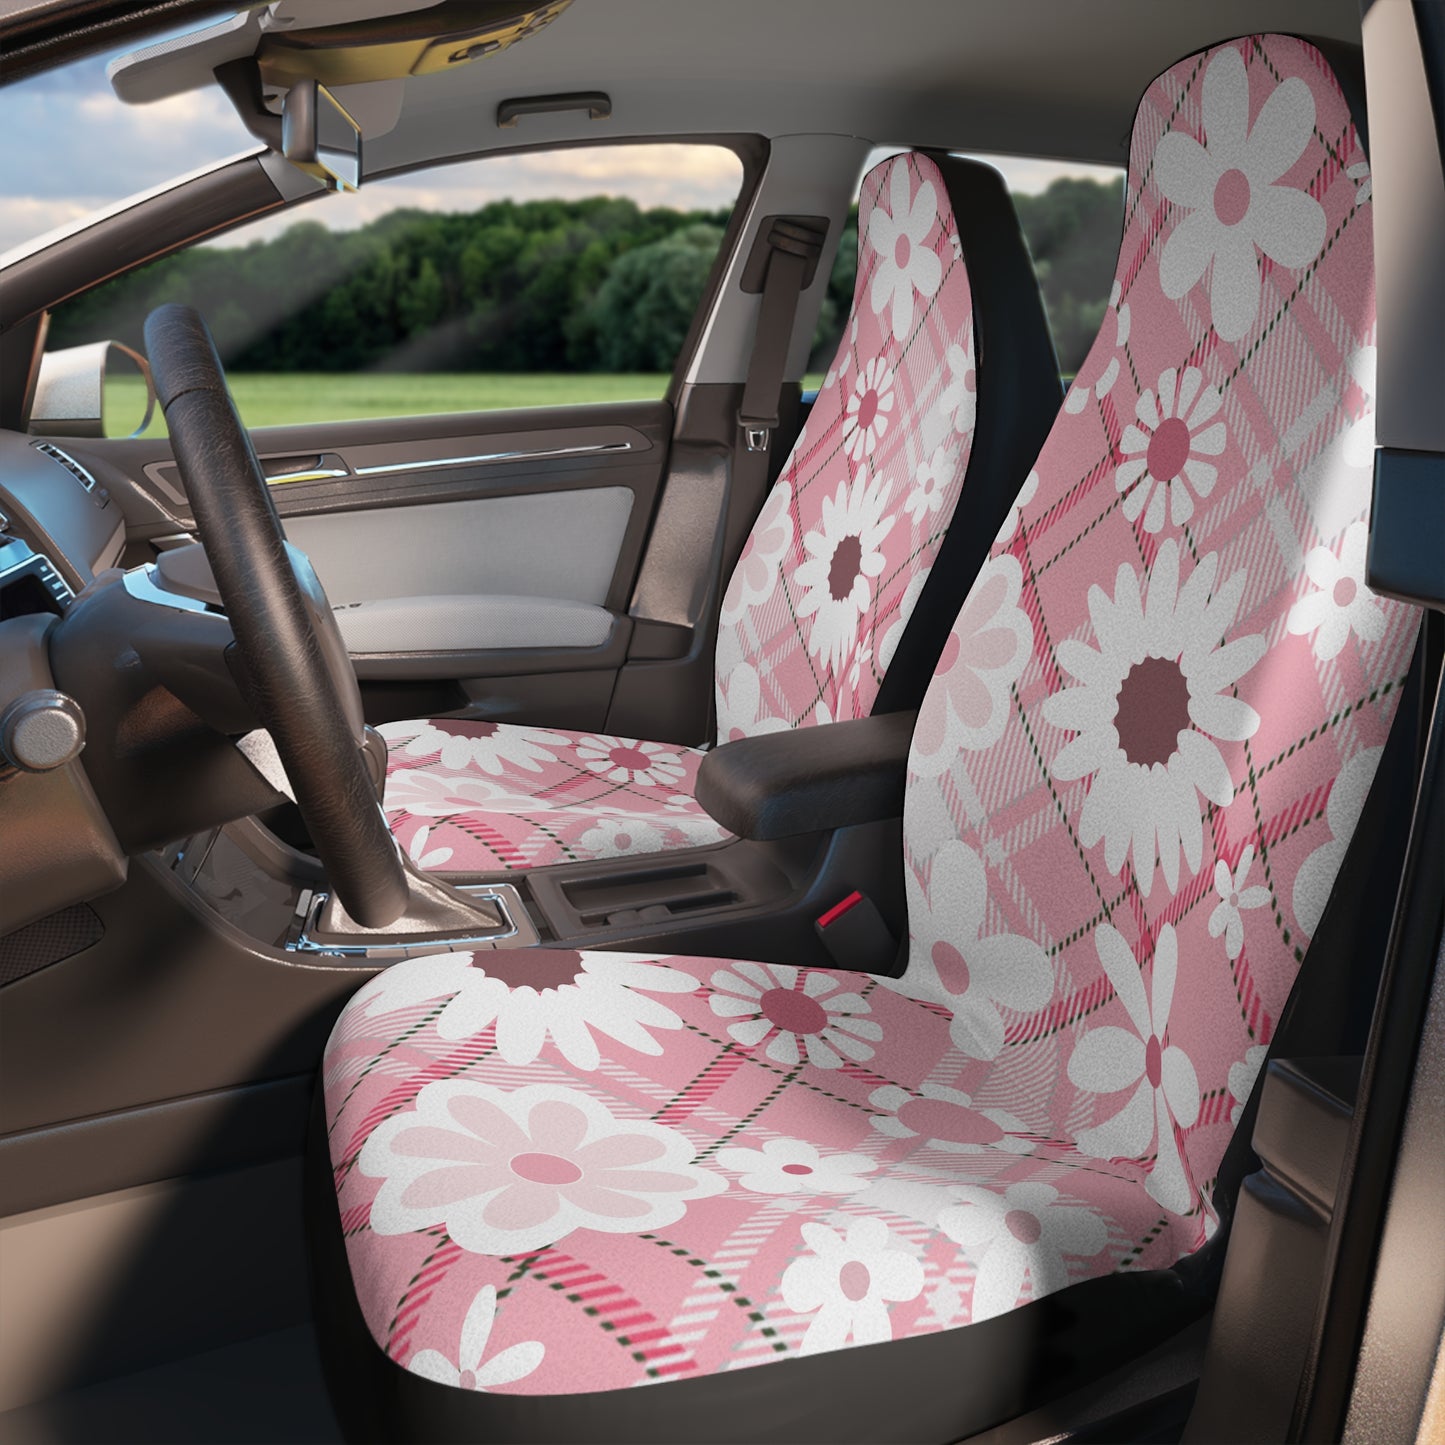 Pink & Plaid & White Daisy Preppy Car Seat Covers